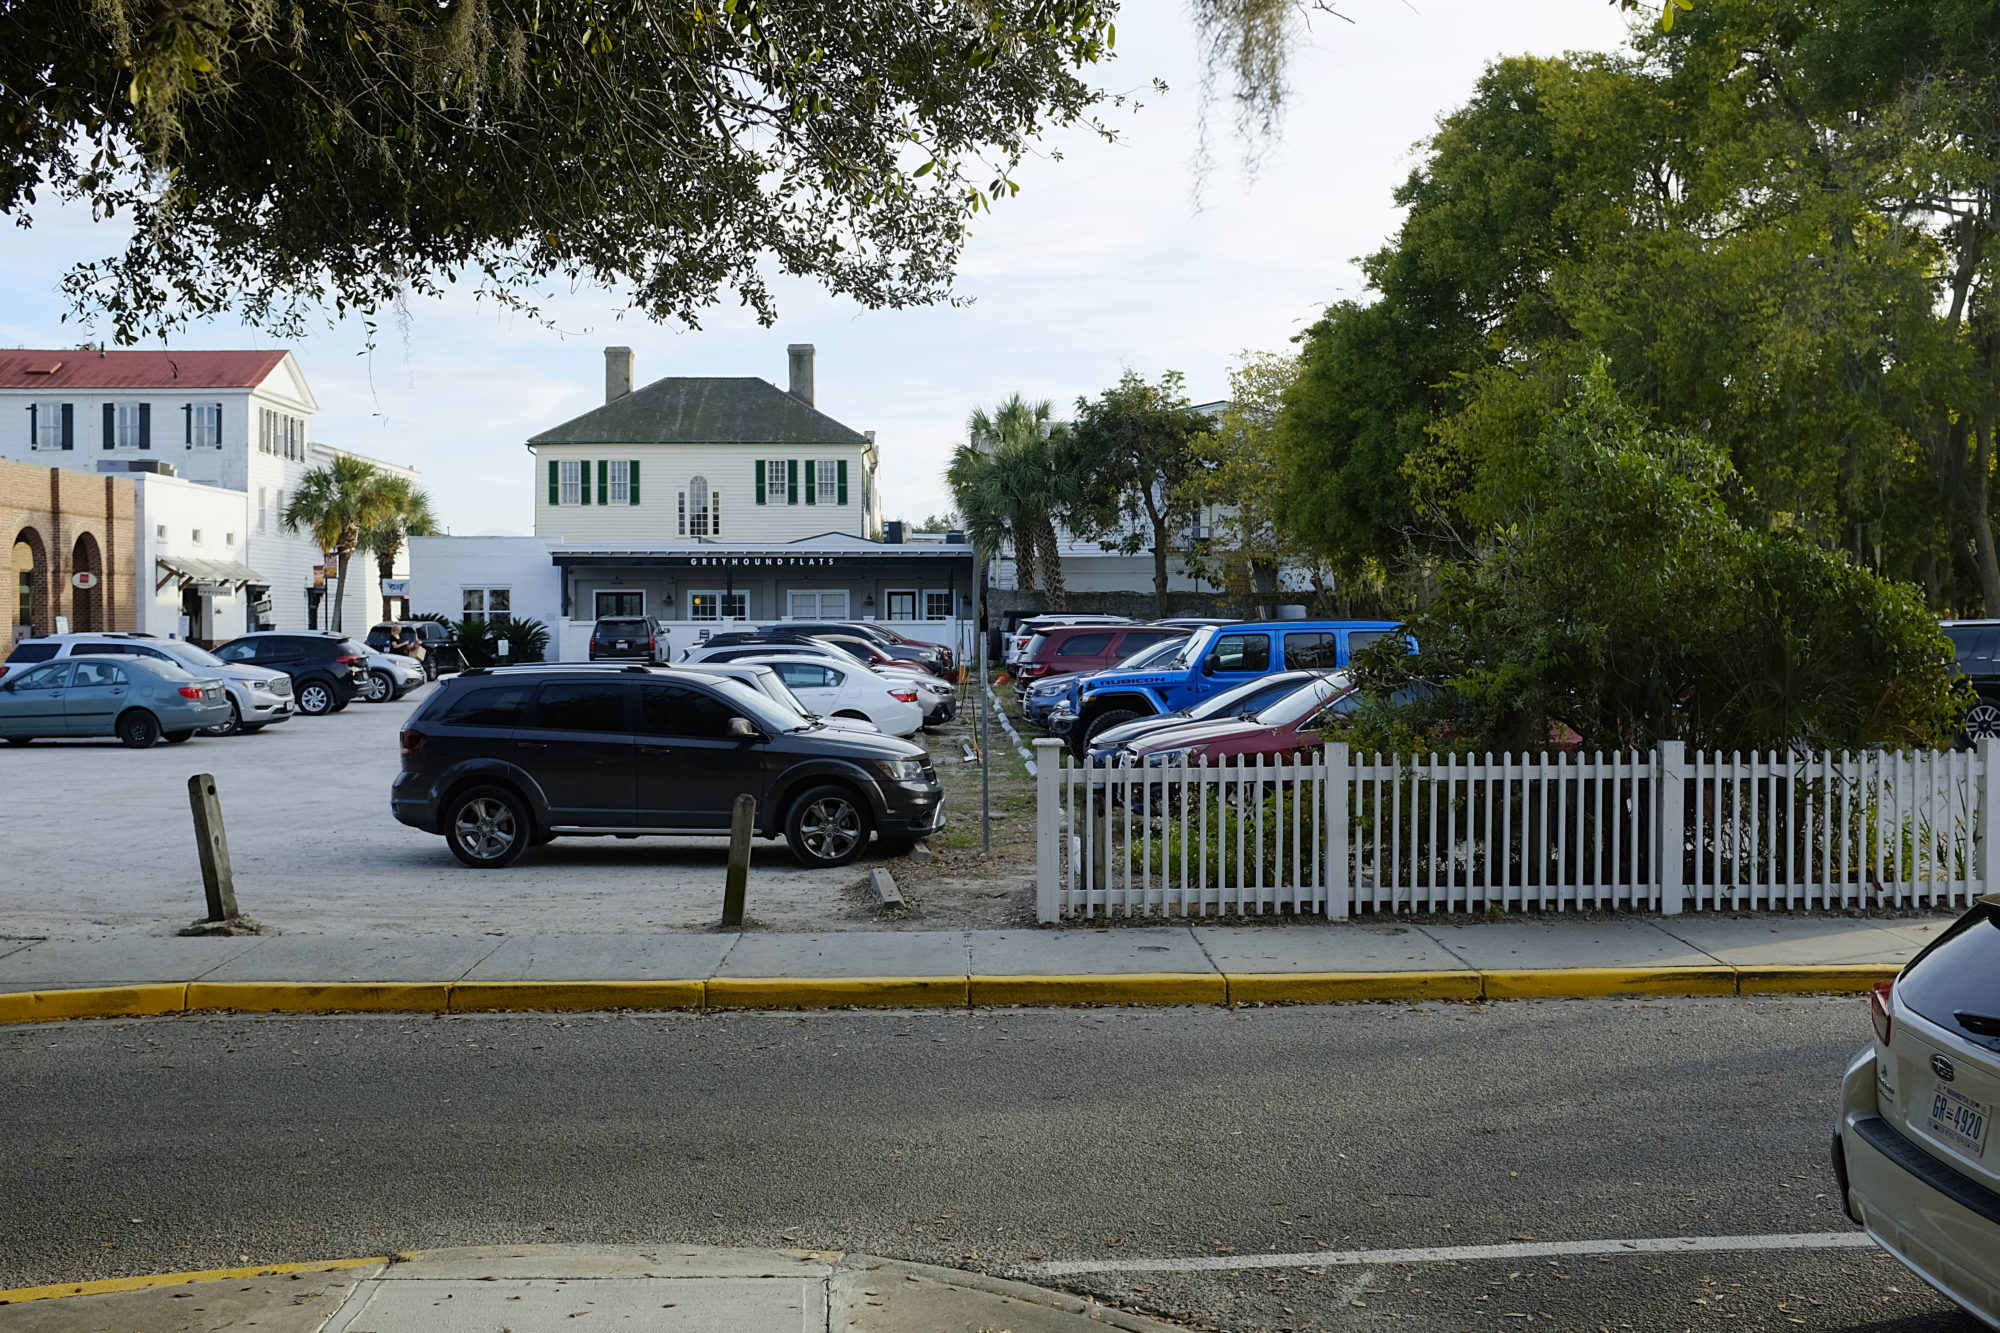 View of a parking lot in Beaufort